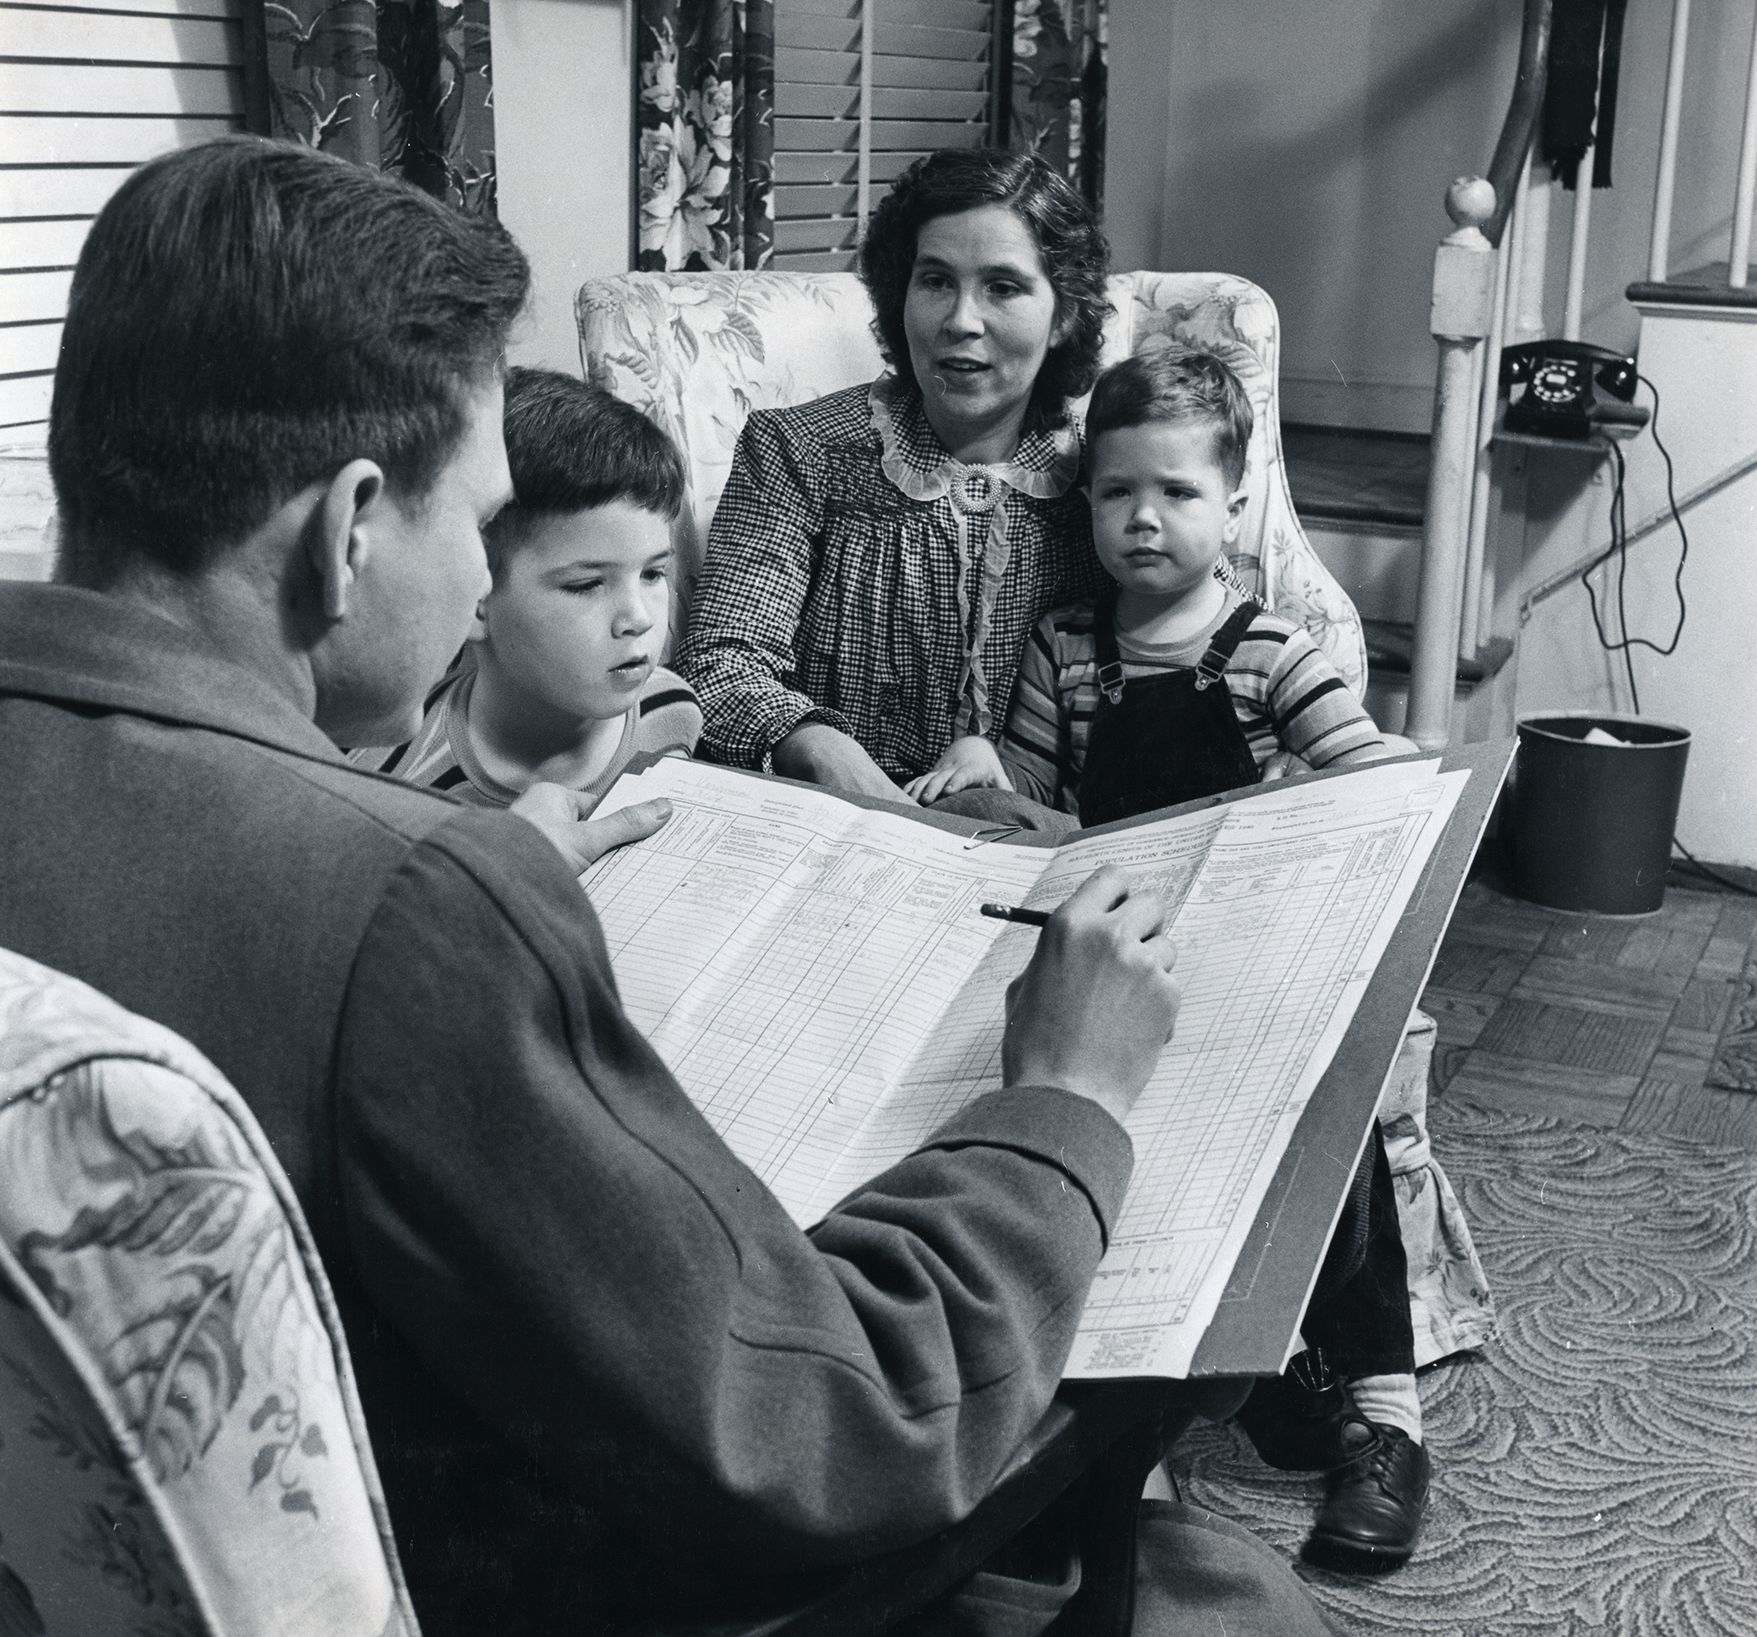 1950 Census Records Release: A family completes their Census form.